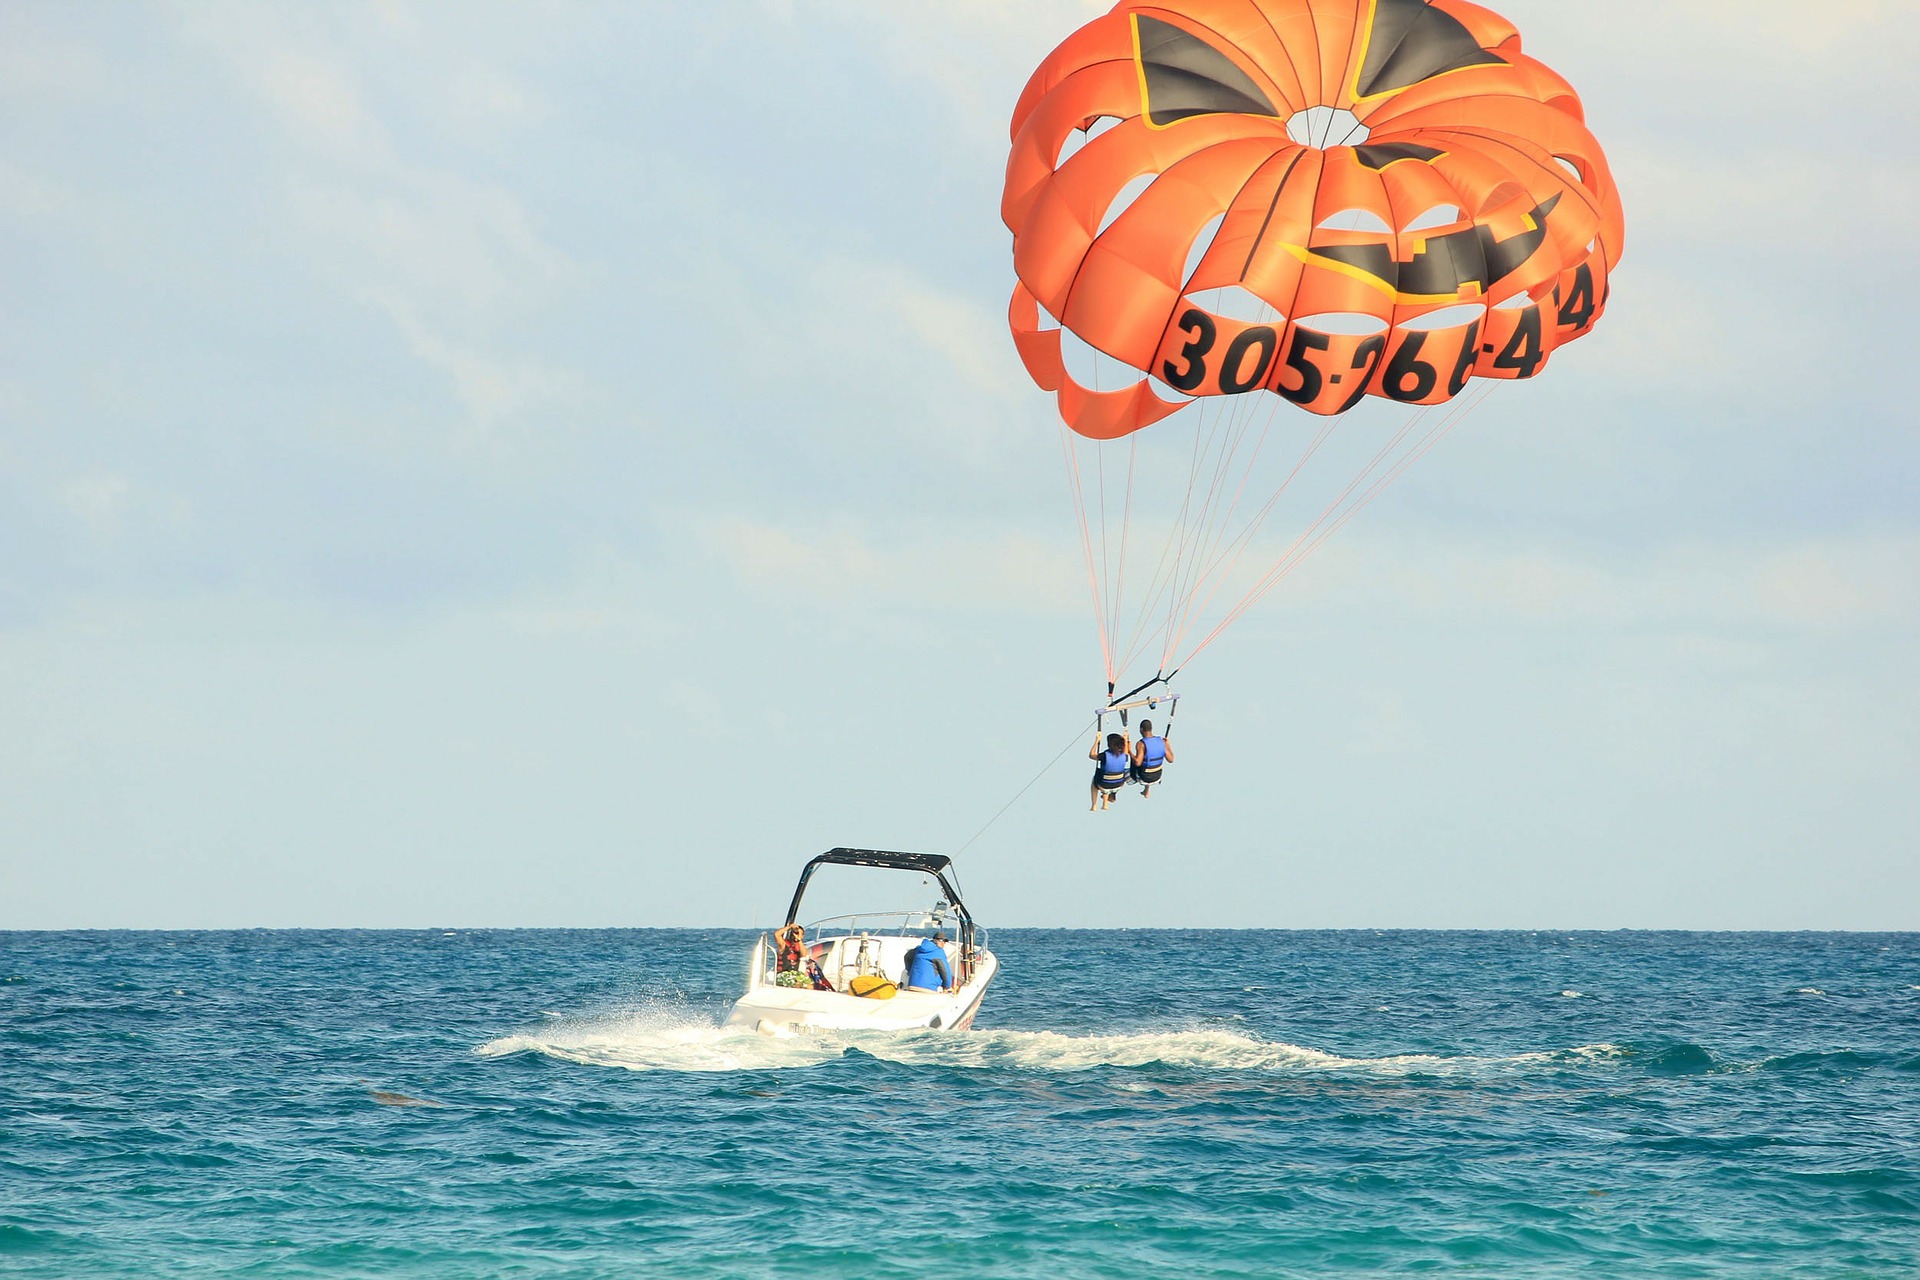 Group of people parasailing